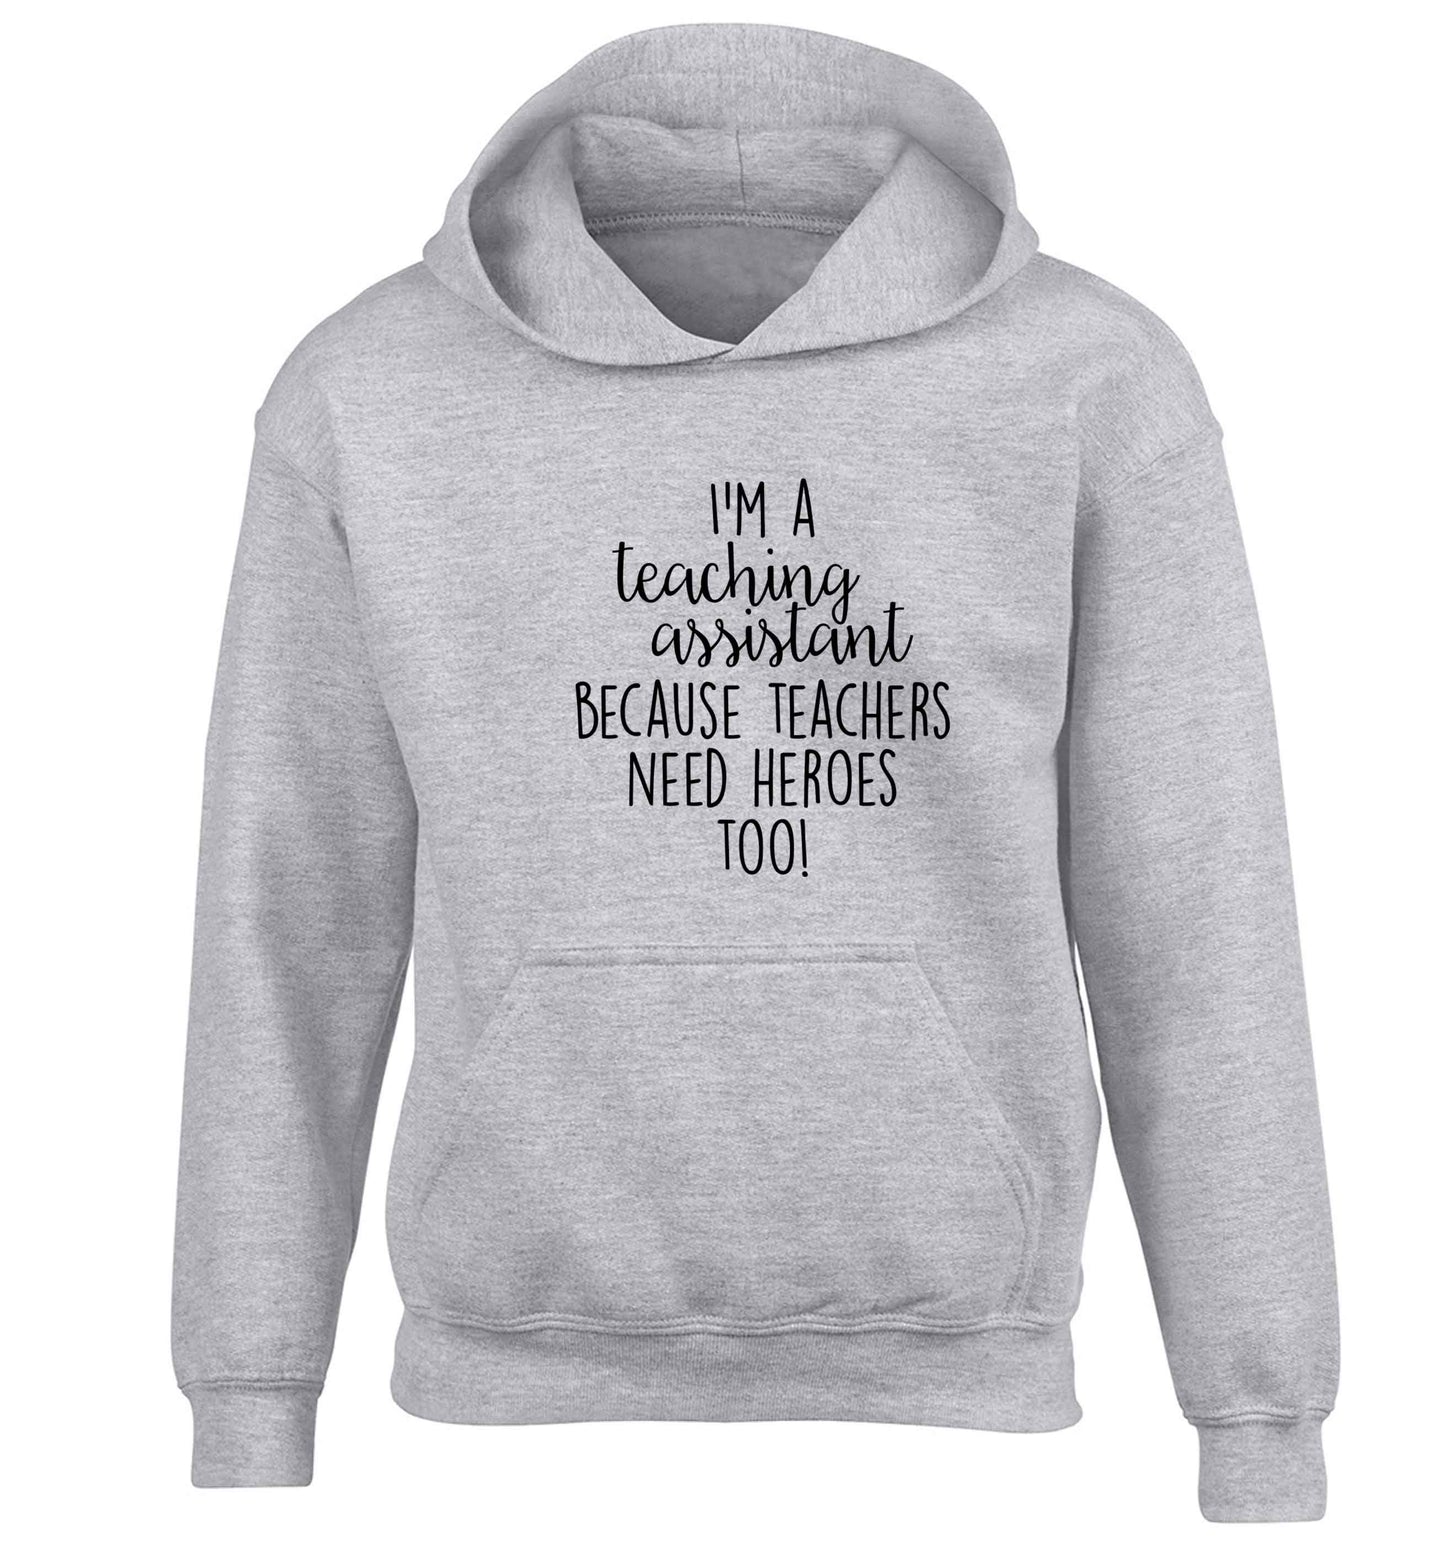 I'm a teaching assistant because teachers need heroes too! children's grey hoodie 12-13 Years